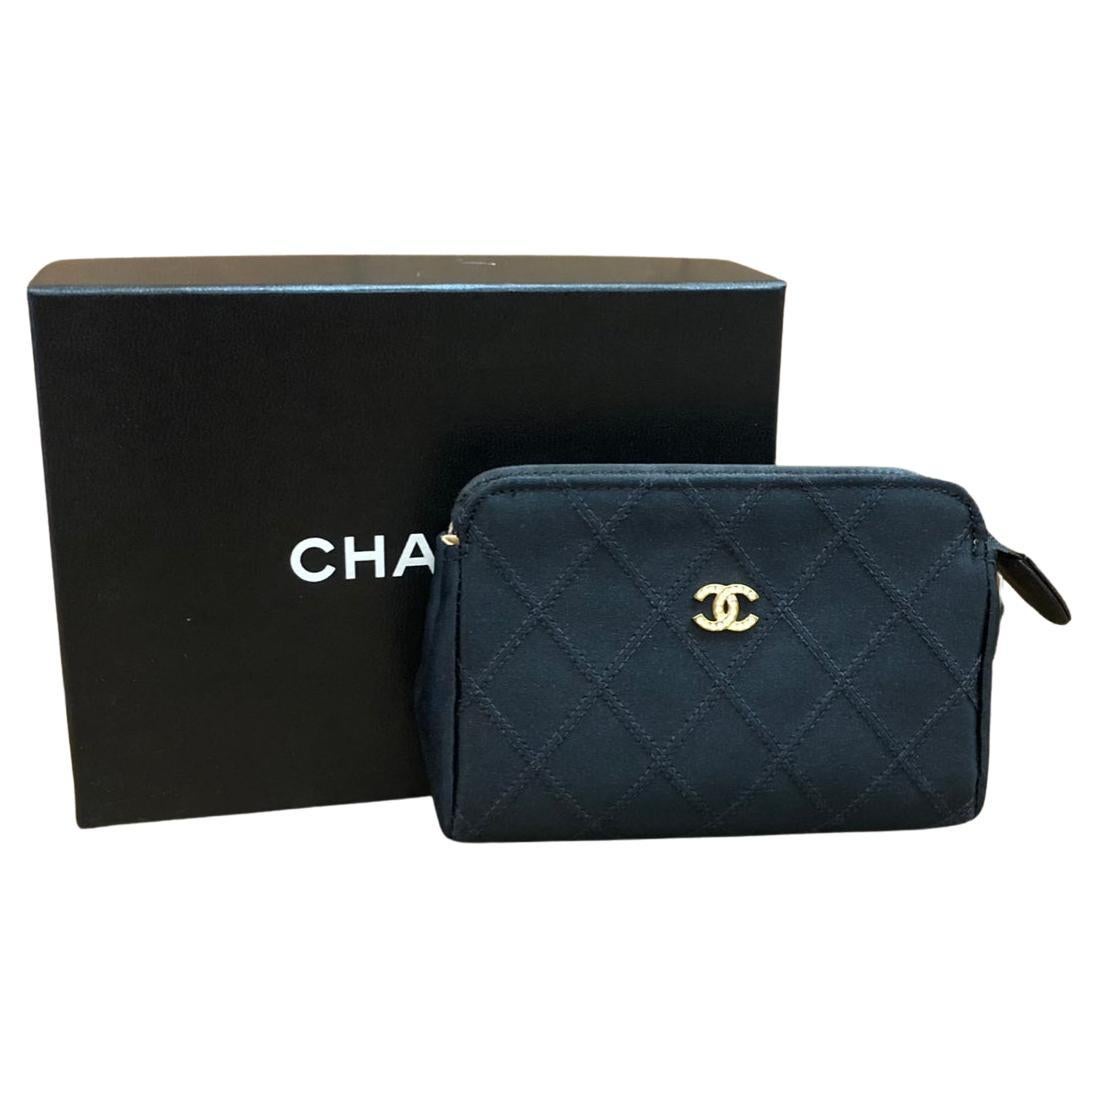 1990s Vintage CHANEL Quilted Satin Mini Pouch Bag Black For Sale